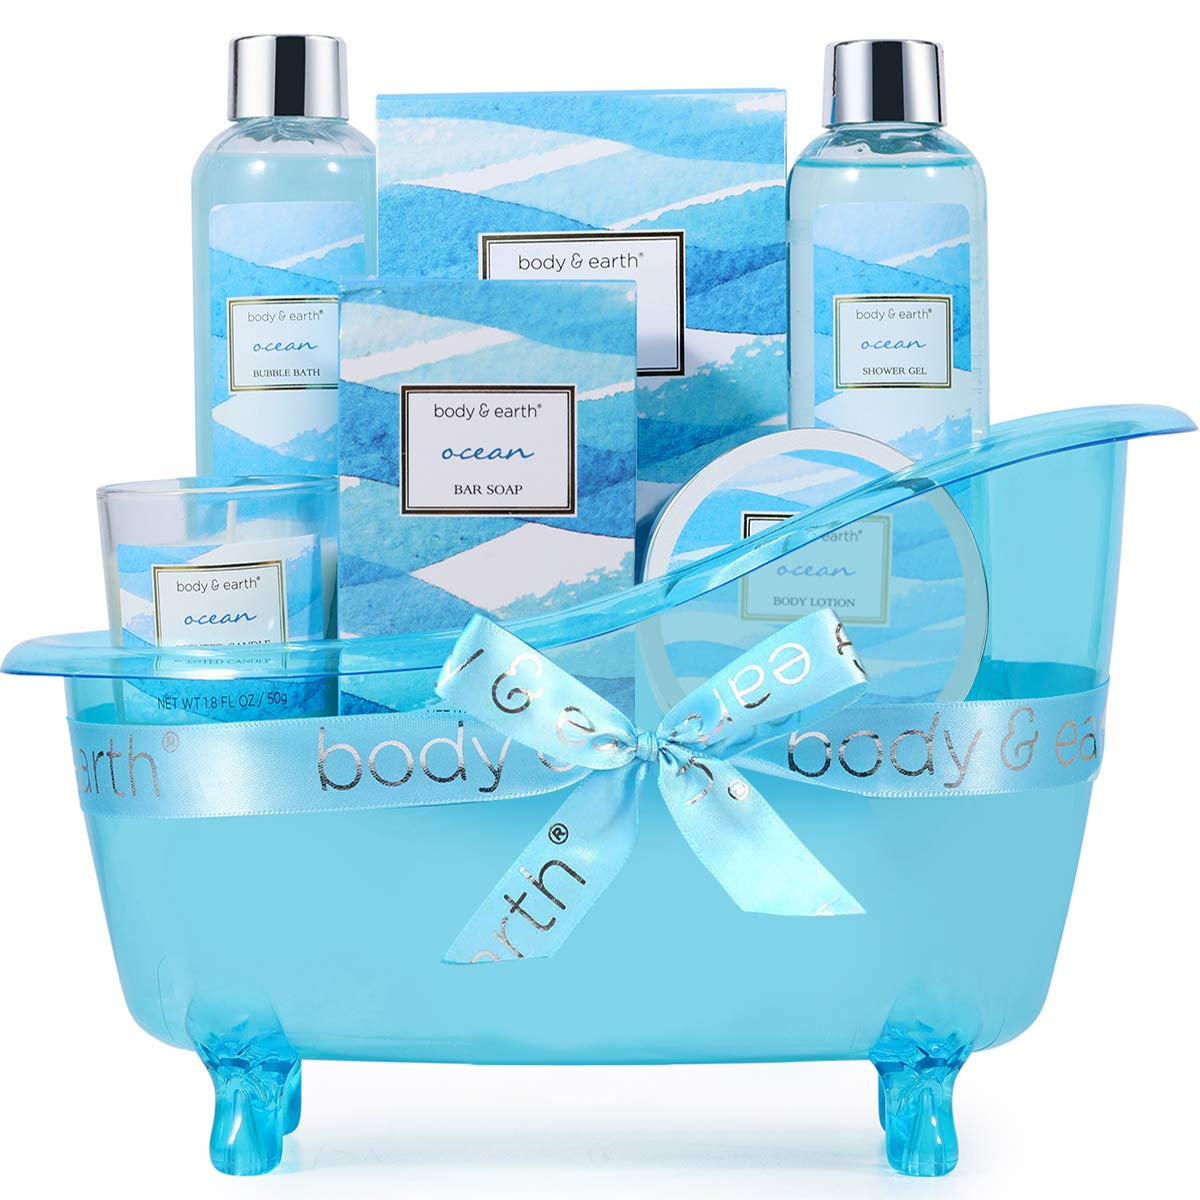 Pampering Good Vibes Gift Basket for Teens, Women 7pcs Get Well Soon Gifts  for Women. Self Care Gift Set with Mug, Shower Gel, Soap, Bubble Bath, Body